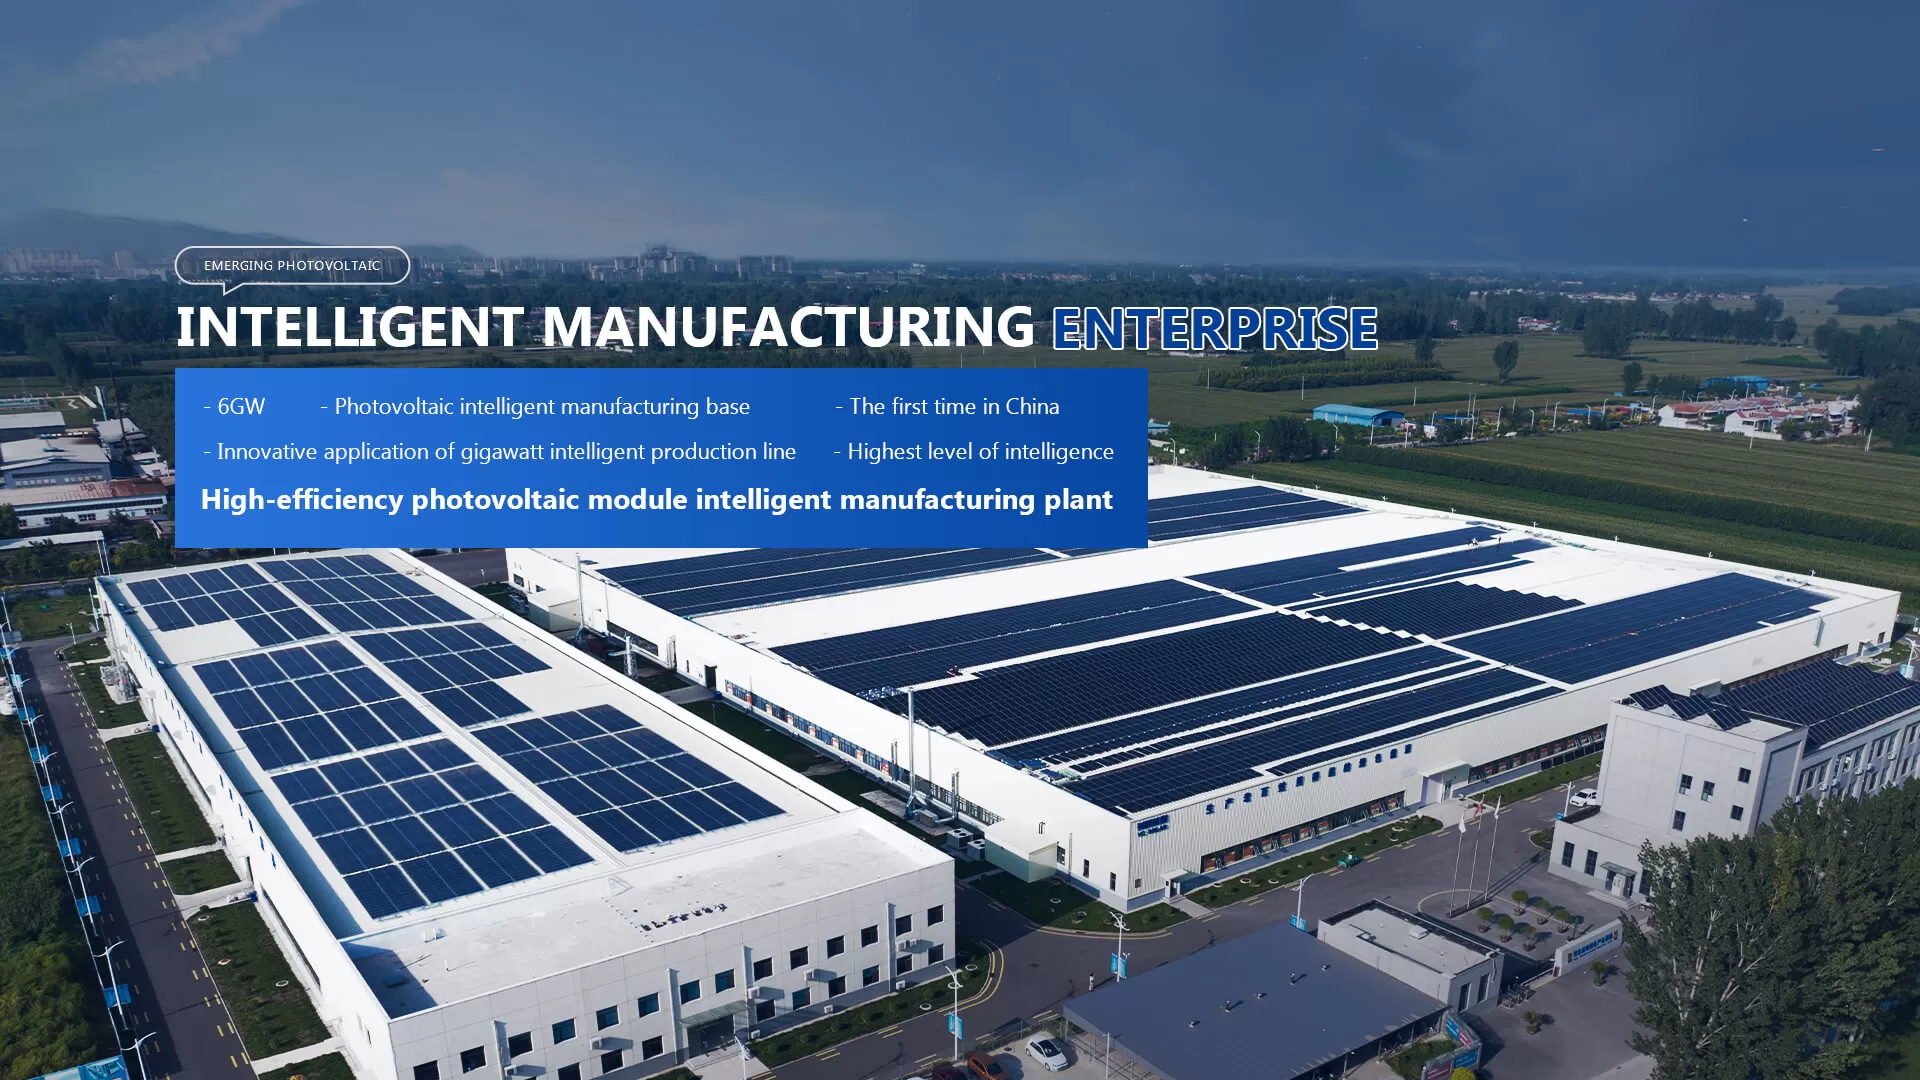 High-efficiency photovoltaic module intelligent manufacturing plant